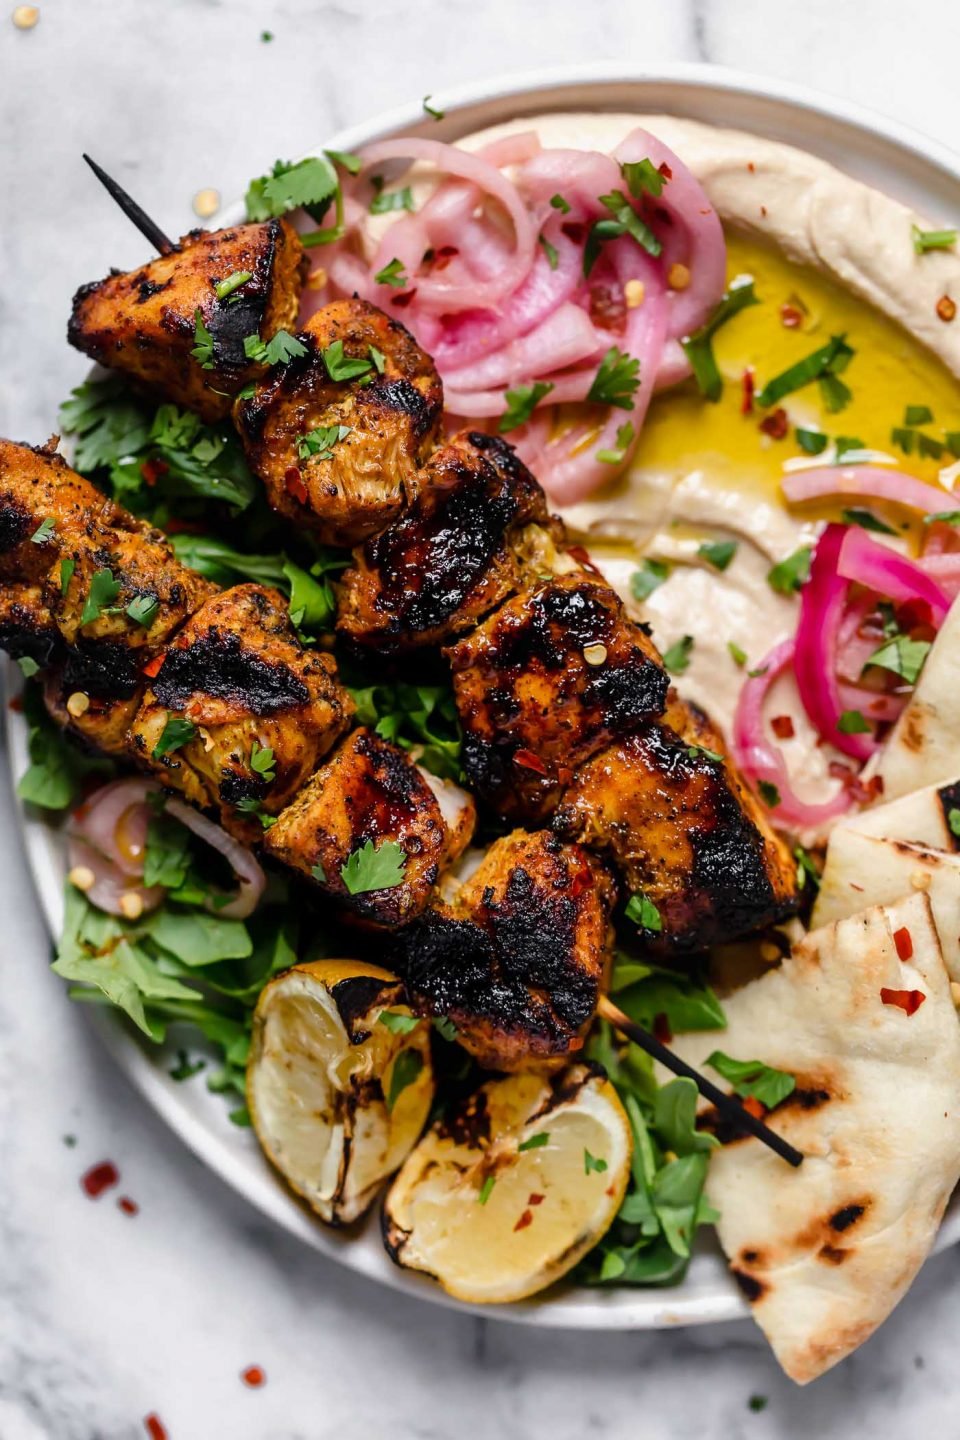 Grilled chicken shawarma served over hummus with pita, pickled onions, & grilled lemons.